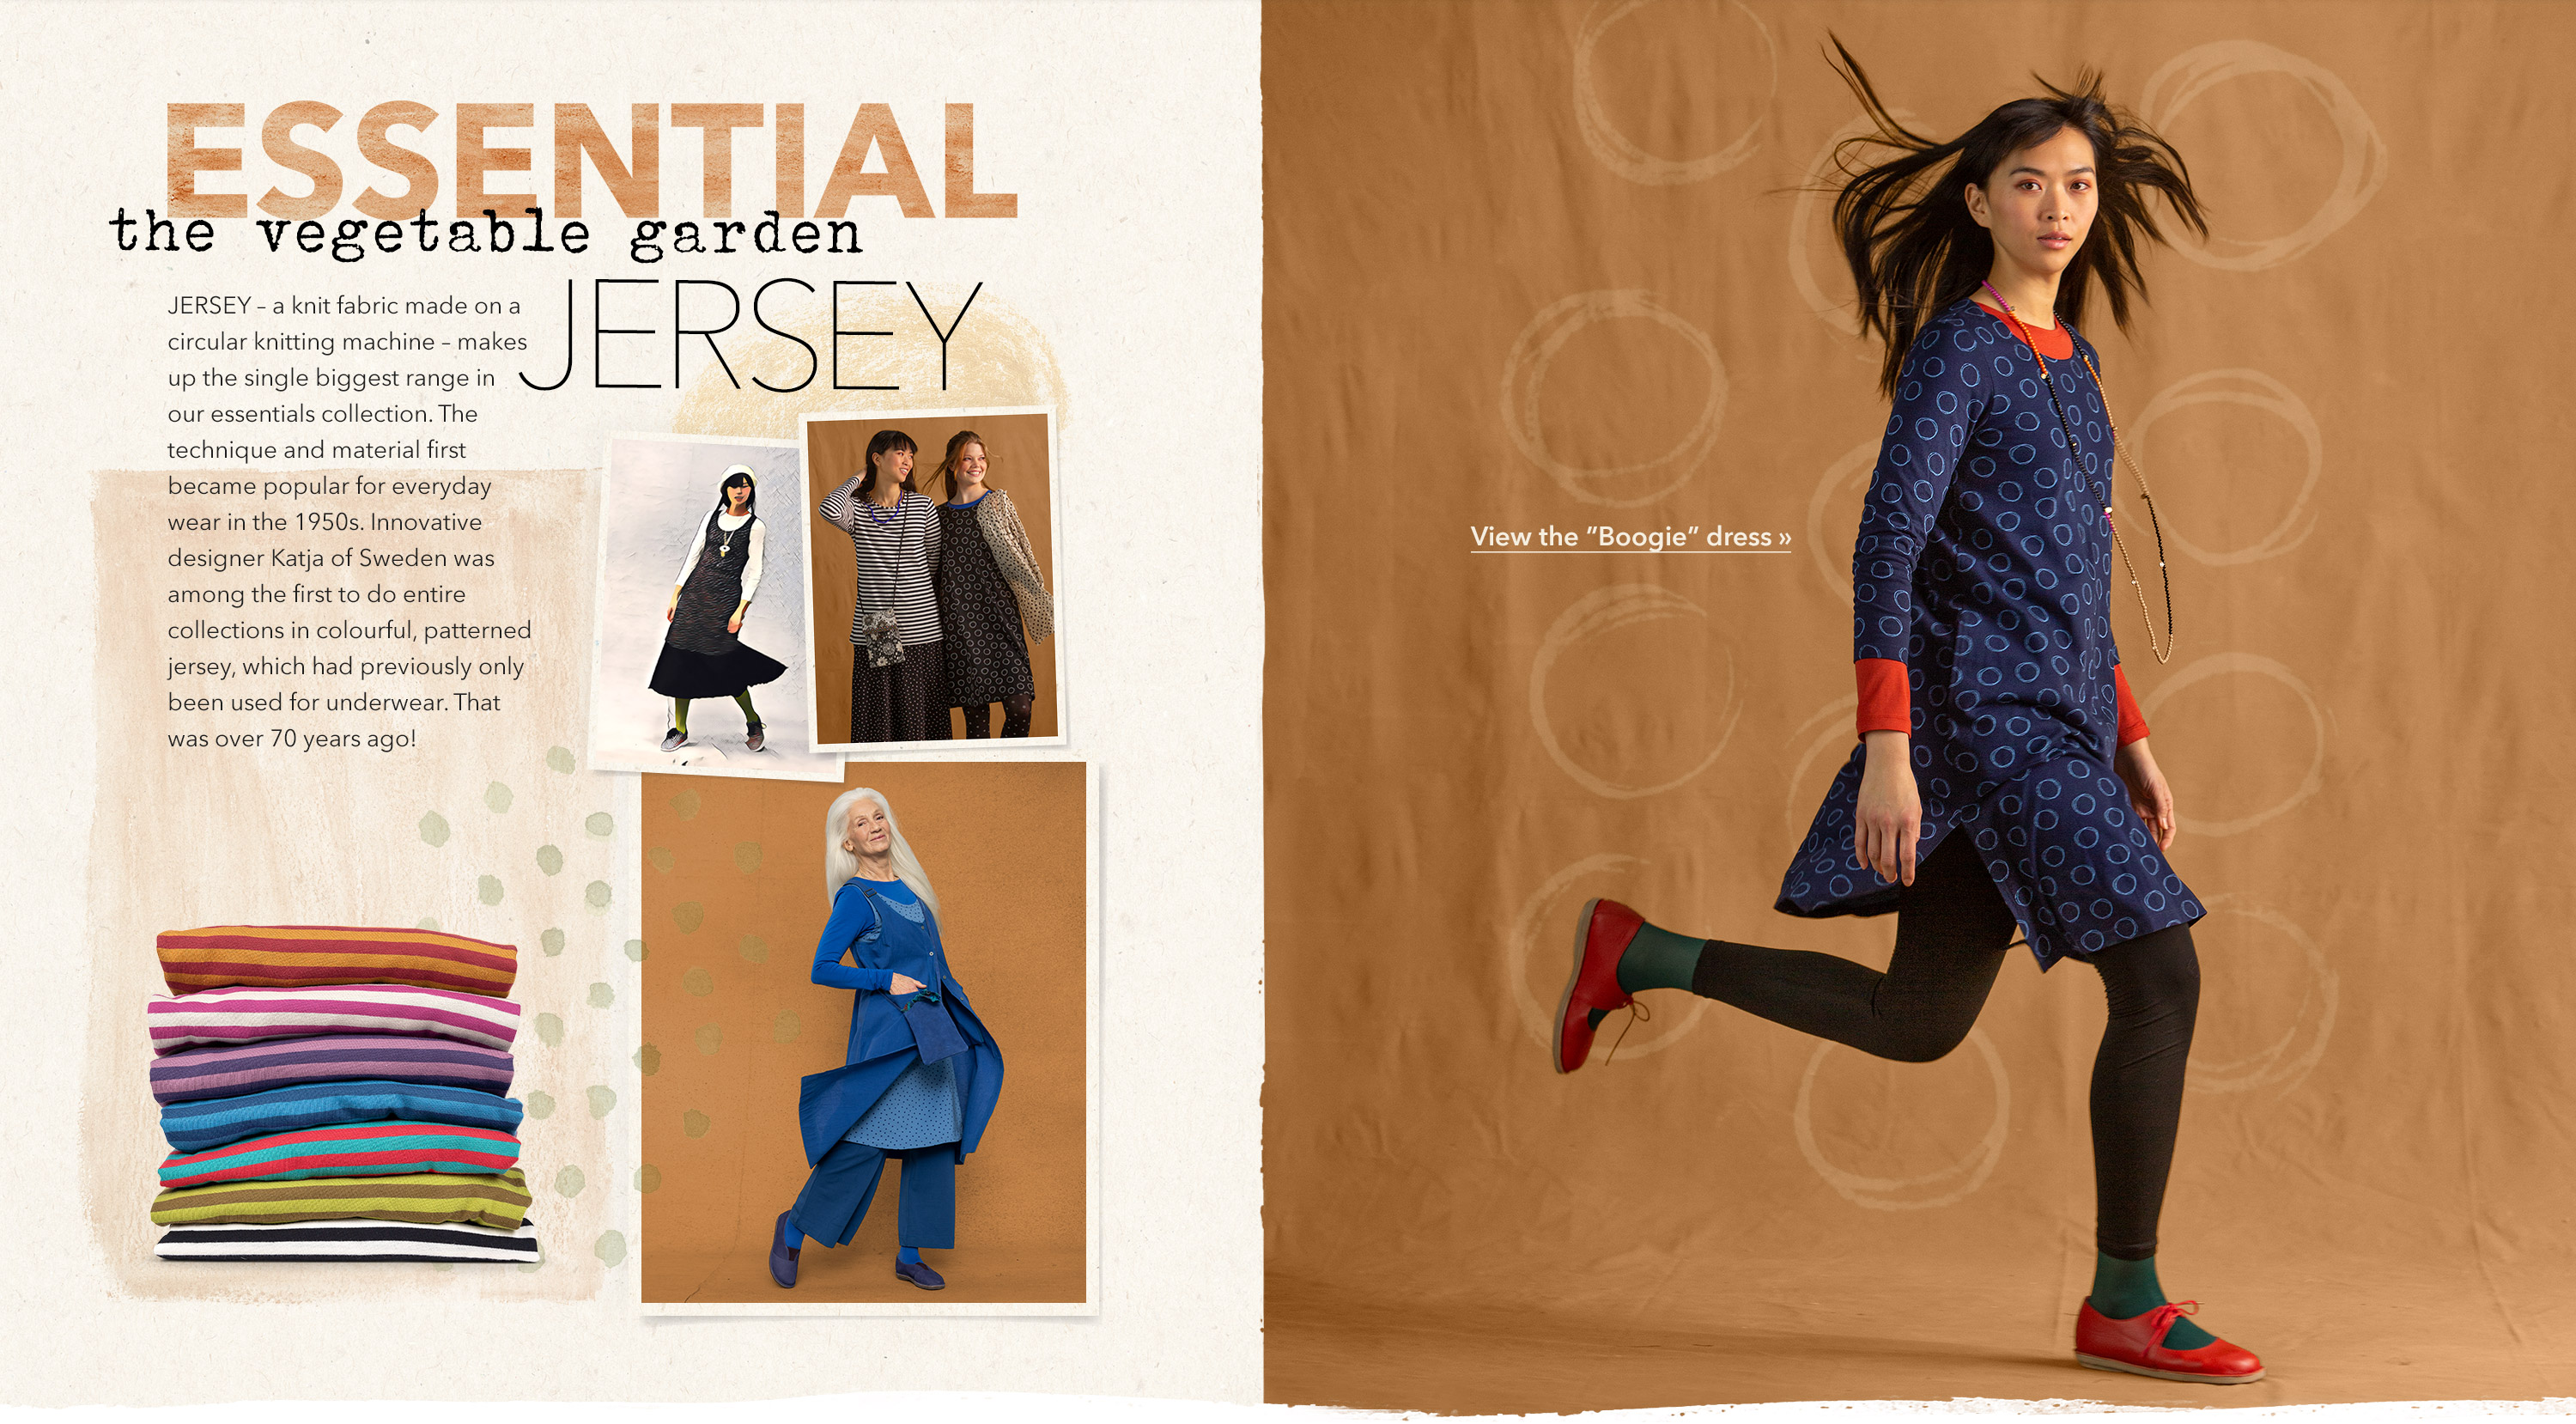 JERSEY – makes up the single biggest range in our essentials collection. 